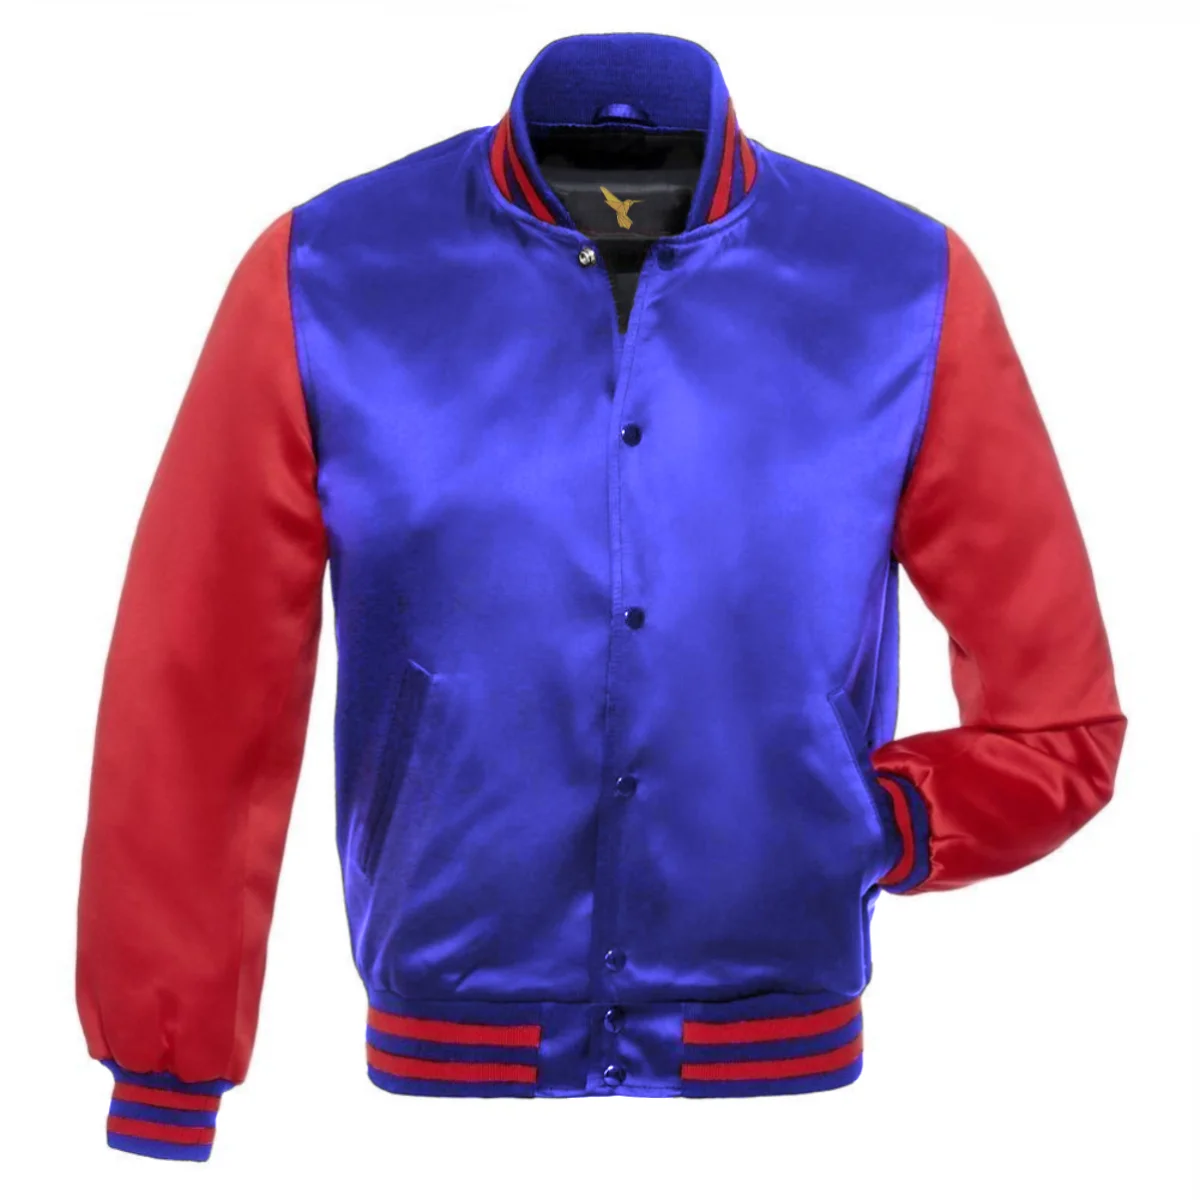 Front Image of Red Varsity Jacket